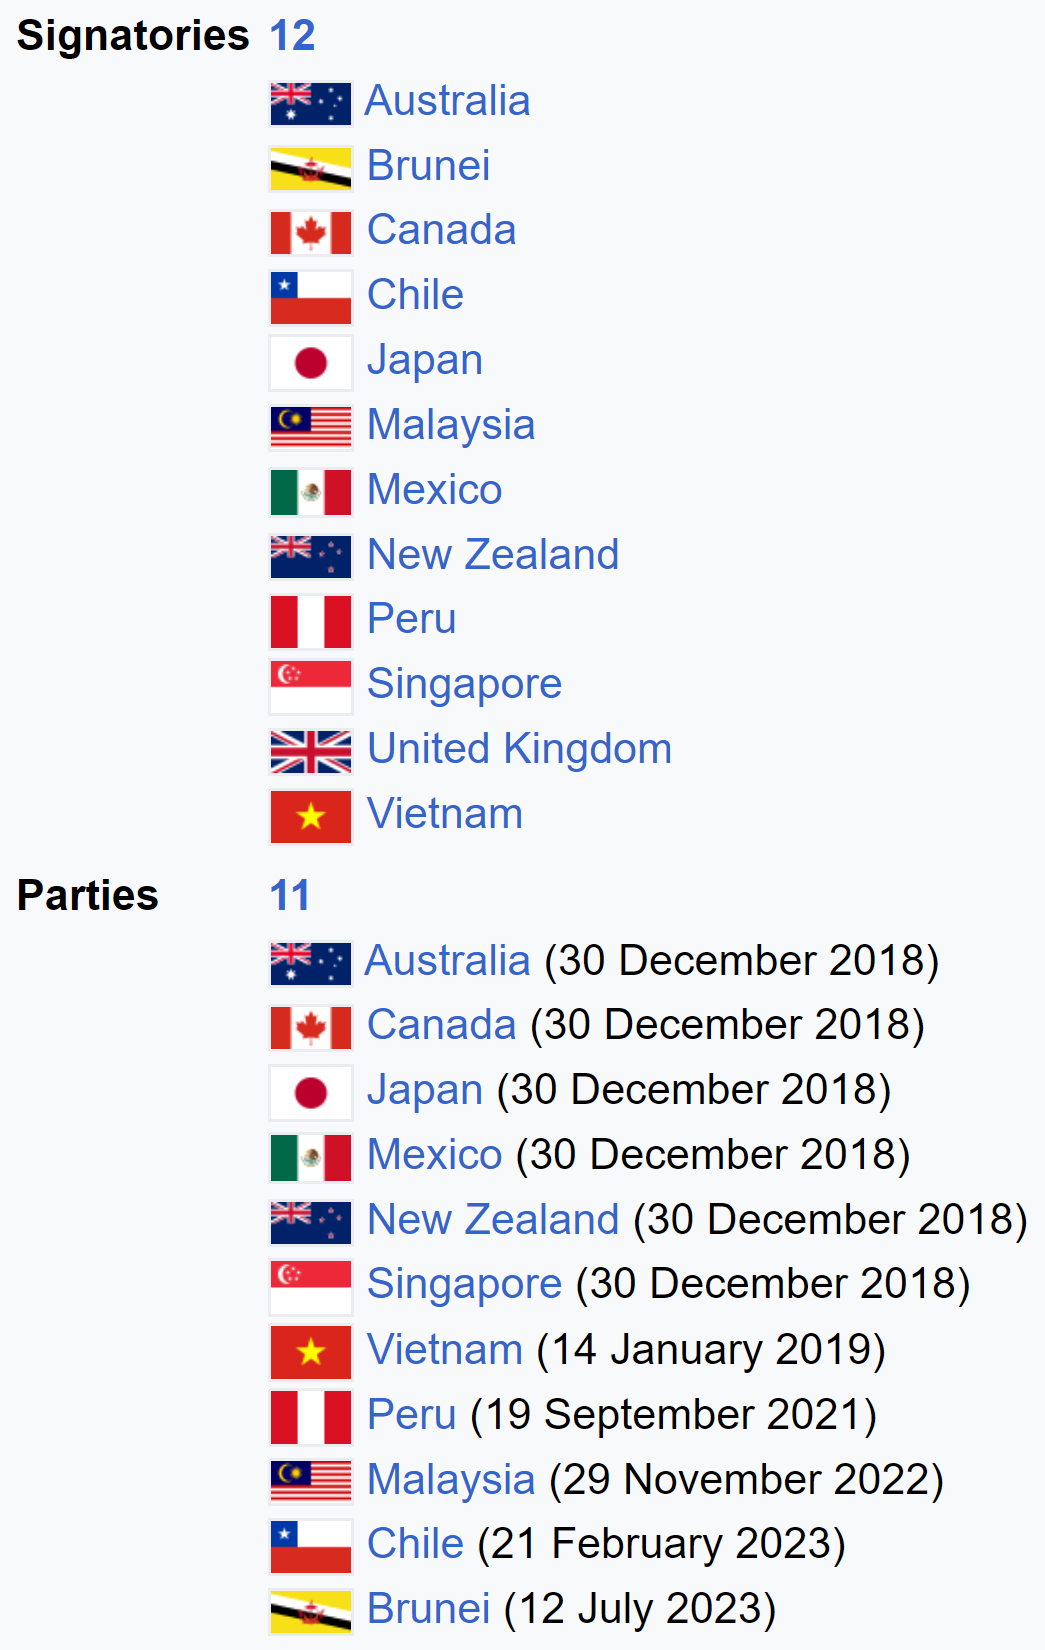 Signatories and Parties of CPTPP